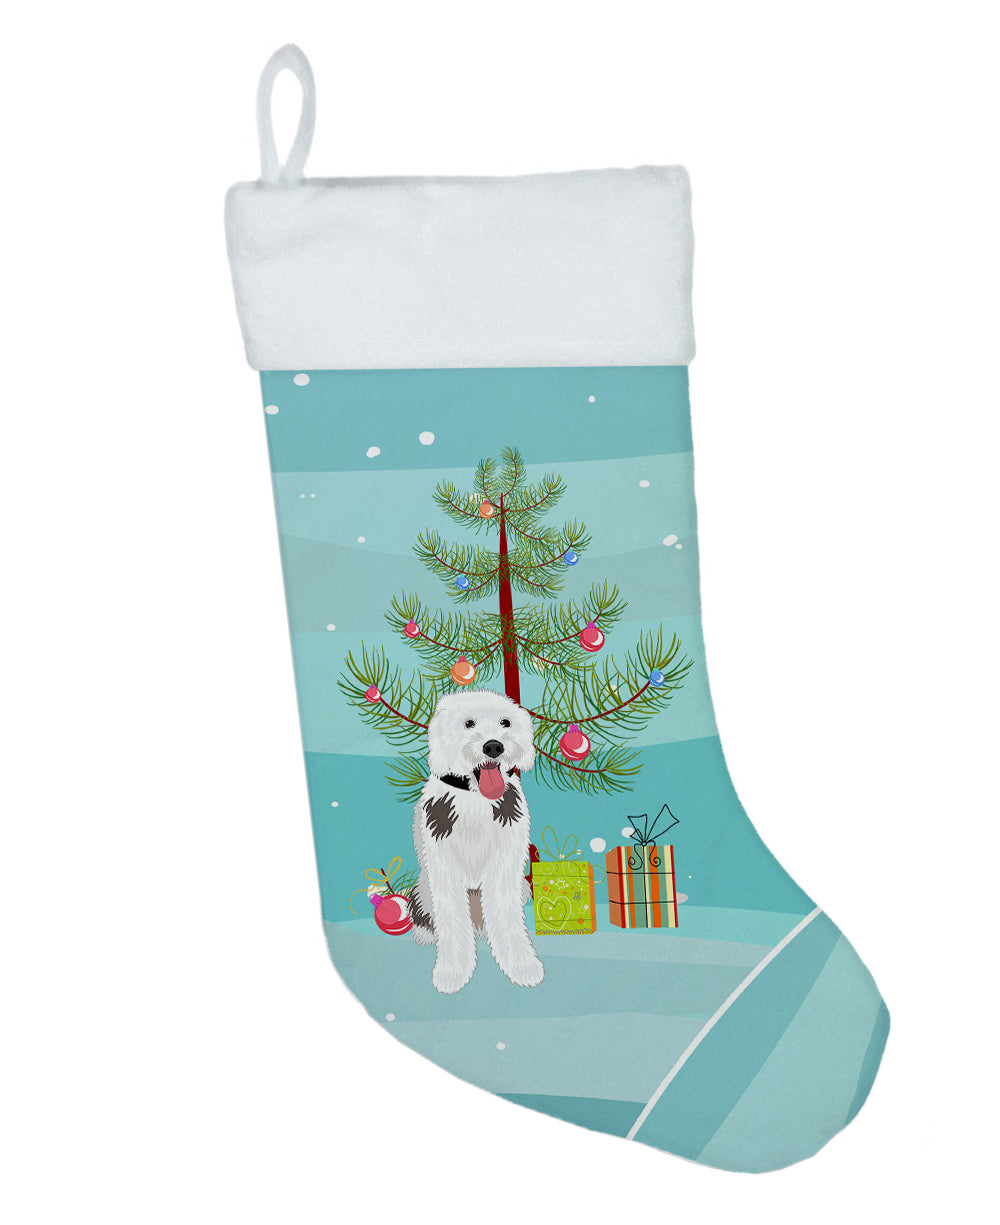 Doodle Silver and White #2 Christmas Christmas Stocking